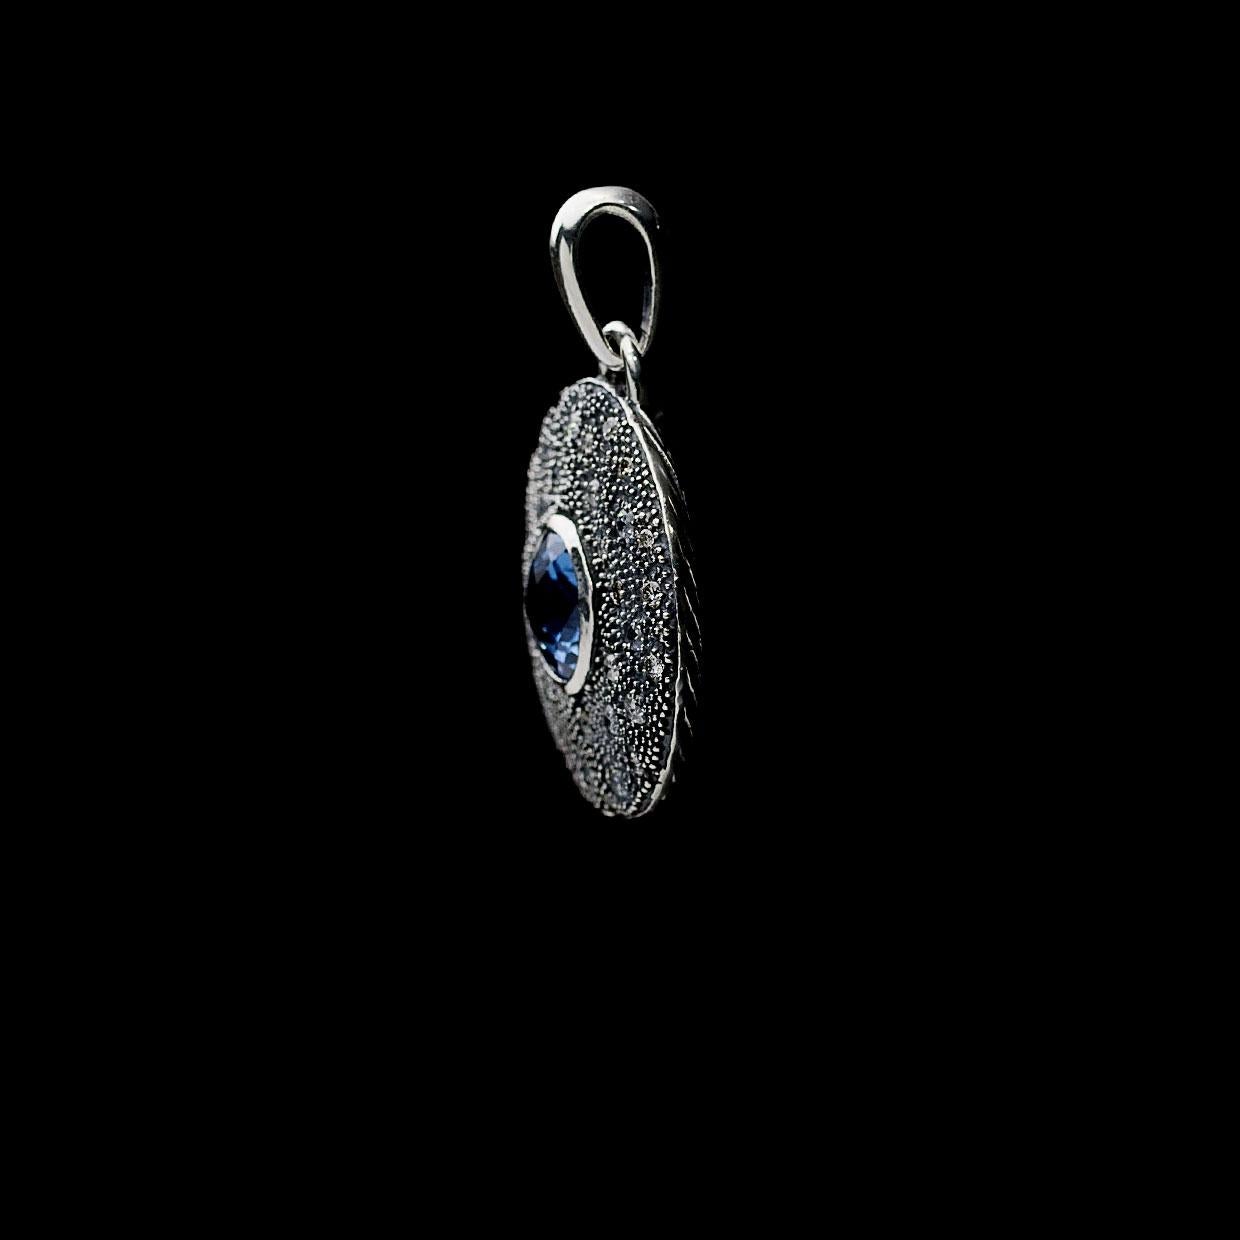 Item Details:
Estimated Retail - $1,800.00
Brand - David Yurman
Collection - Midnight Melange
Metal - 925 Sterling Silver
Total Carat Weight (TCW) - 0.75 ctw (diamonds only)
Style - Pendant
Pendant L x W - 39.5 X 27.3 mm
Colored Stone Color -